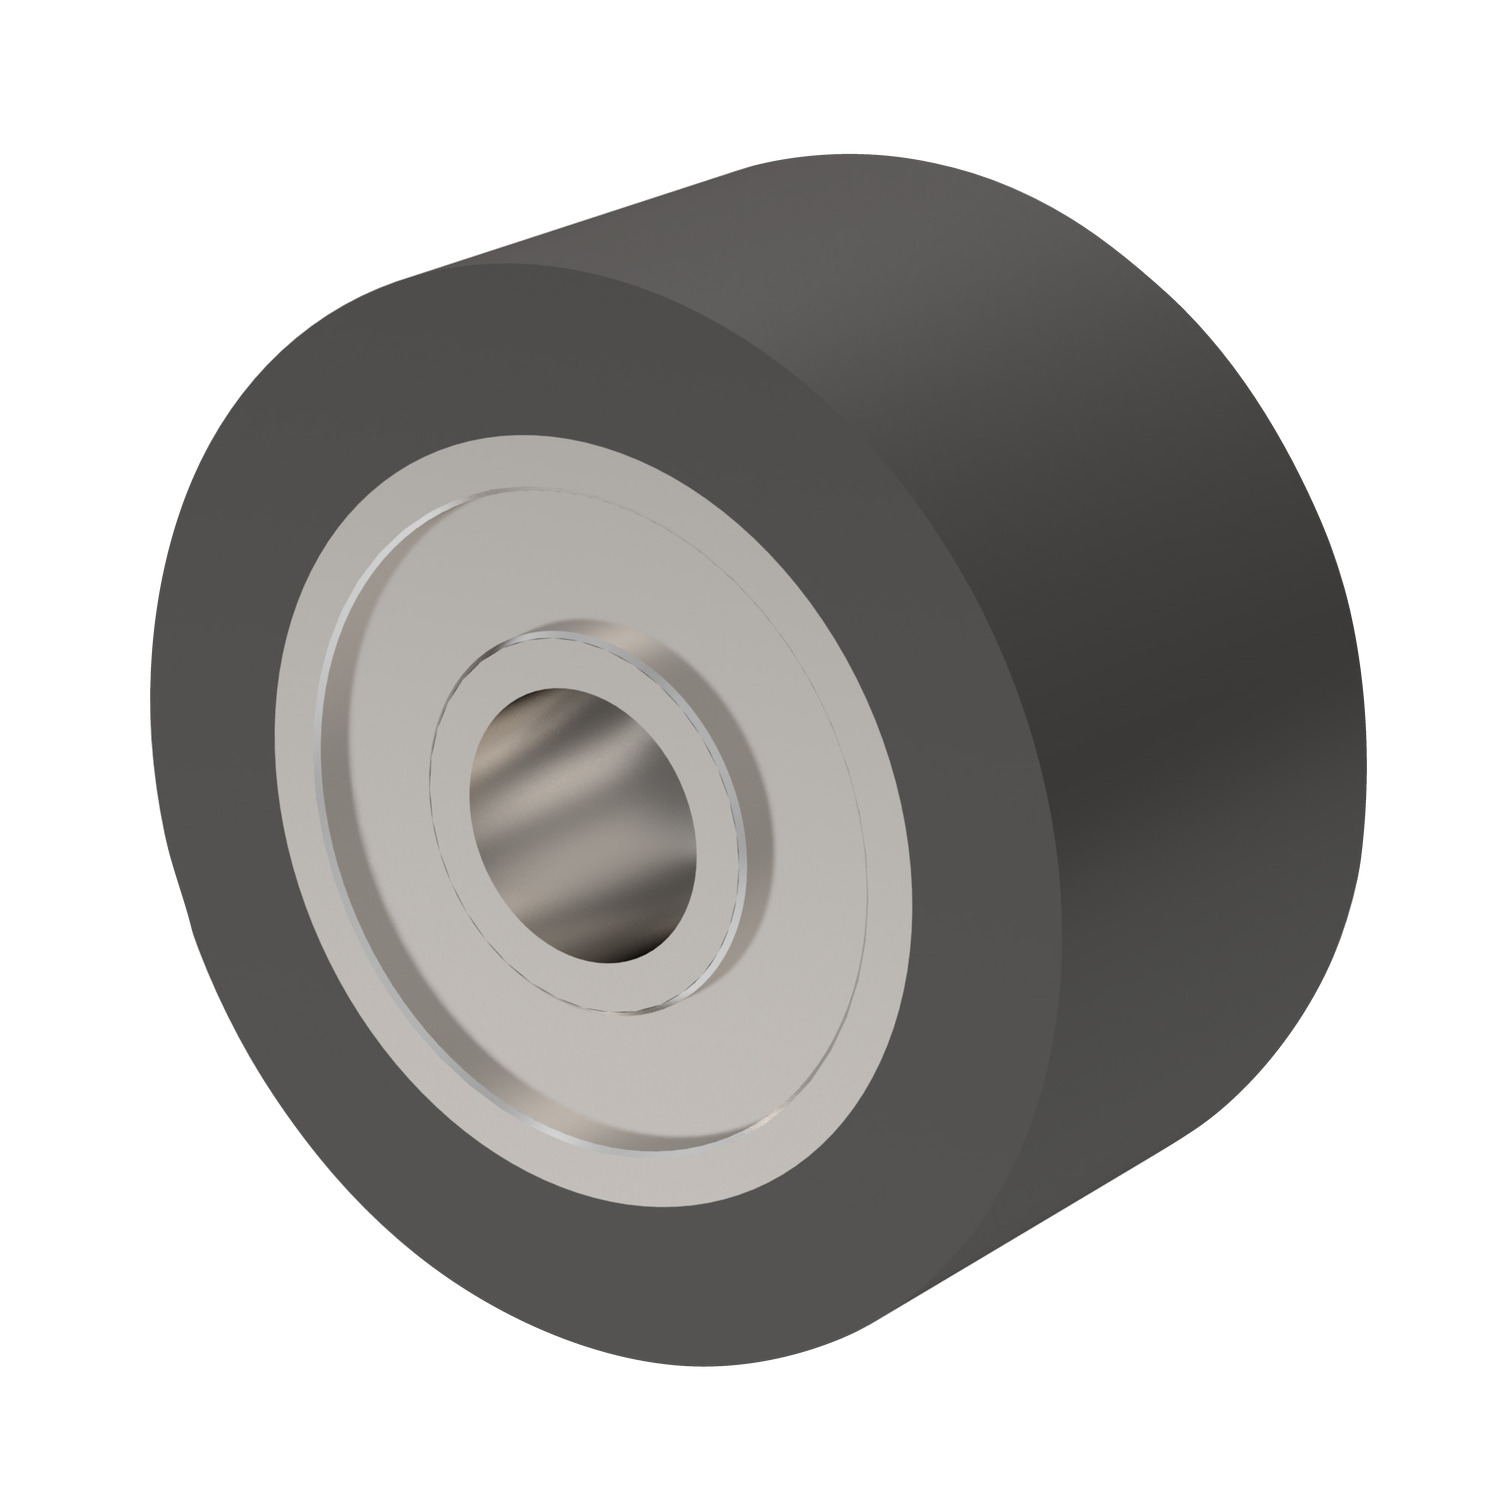 Product 60610, Urethane Covered Bearings bearing only / 